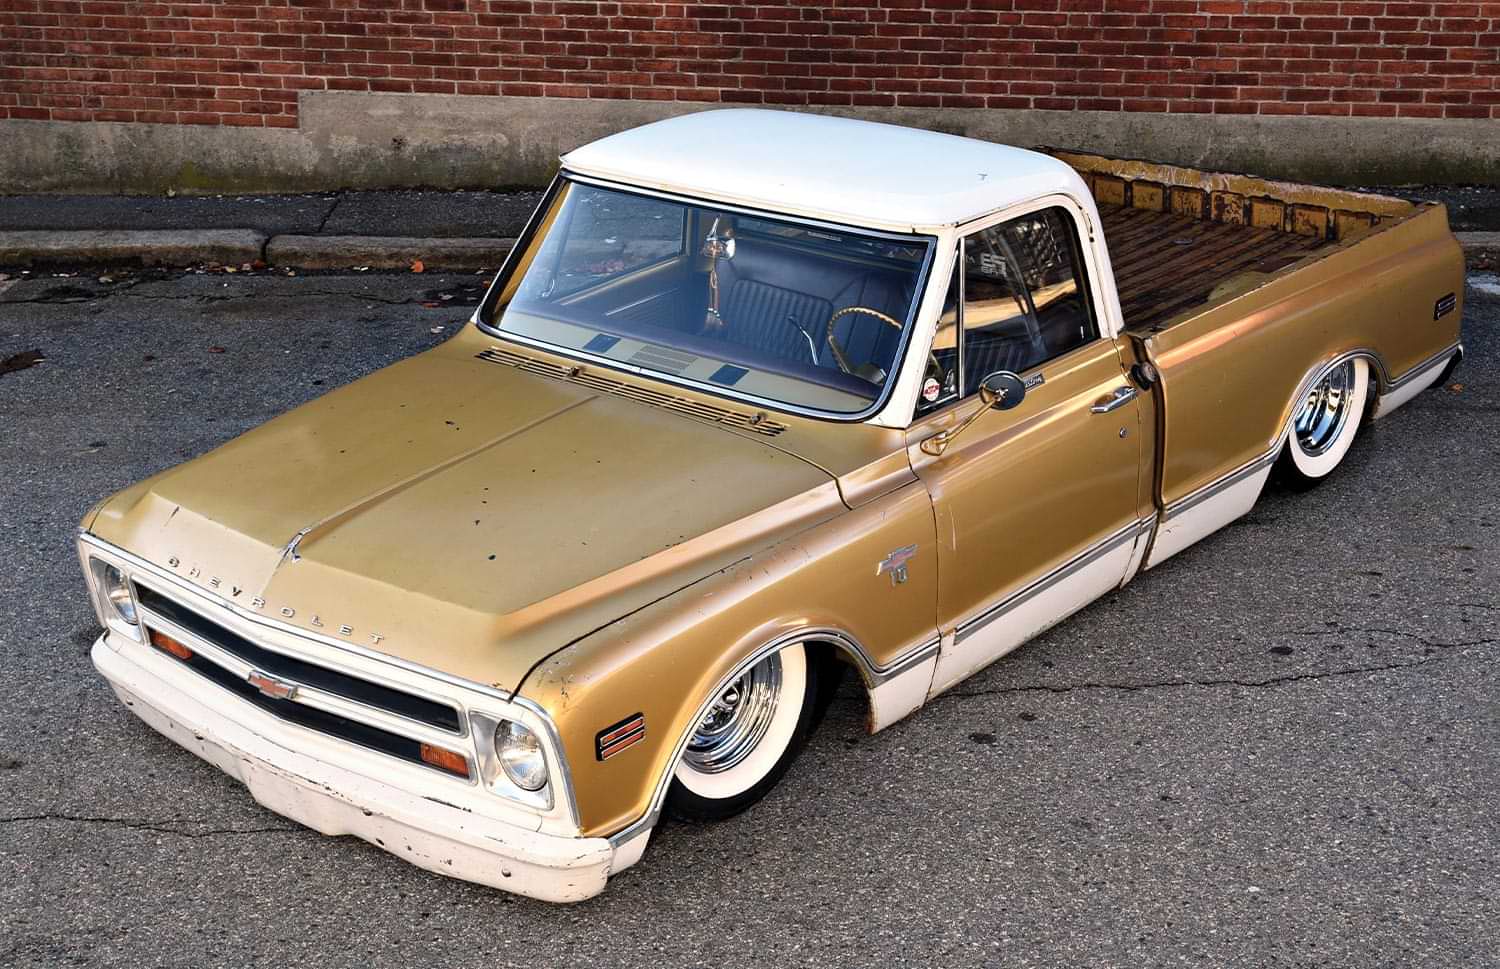 close birds eye view of the gold and ivory '68 C10 parked next to a red brick wall